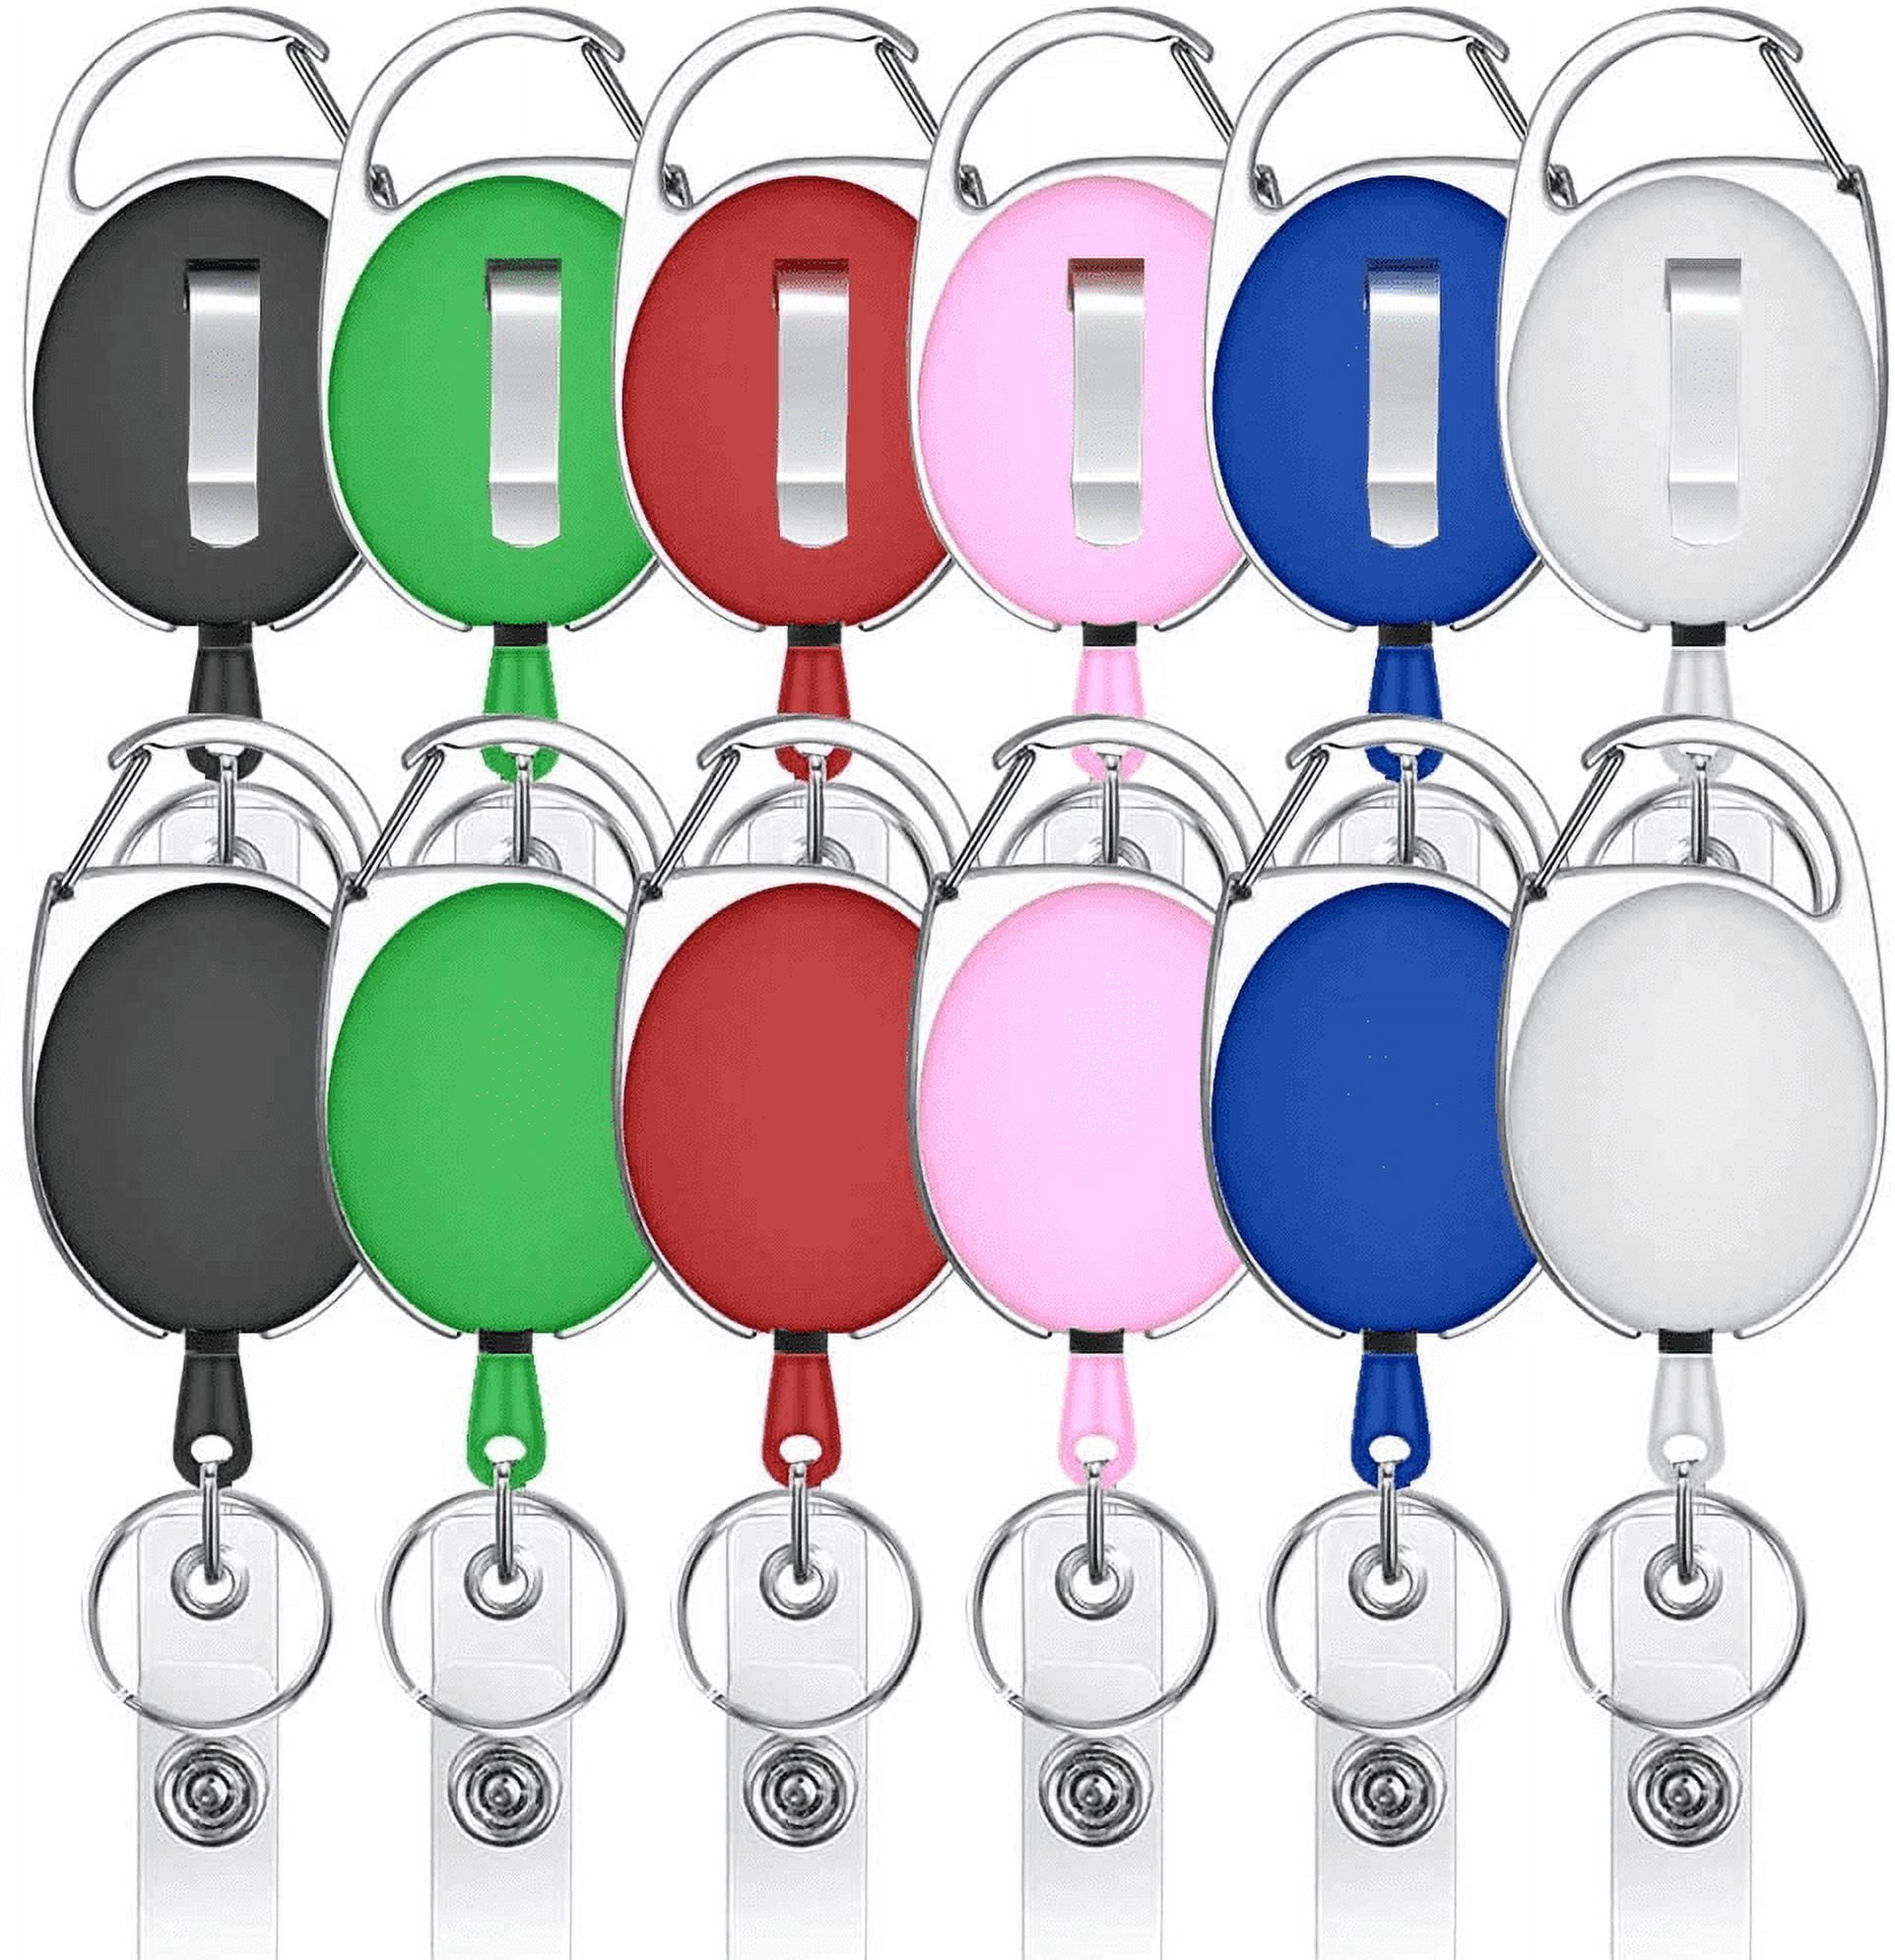 Stainless Steel Clips 20 pcs id Badge Retractable Badge Reel Badge